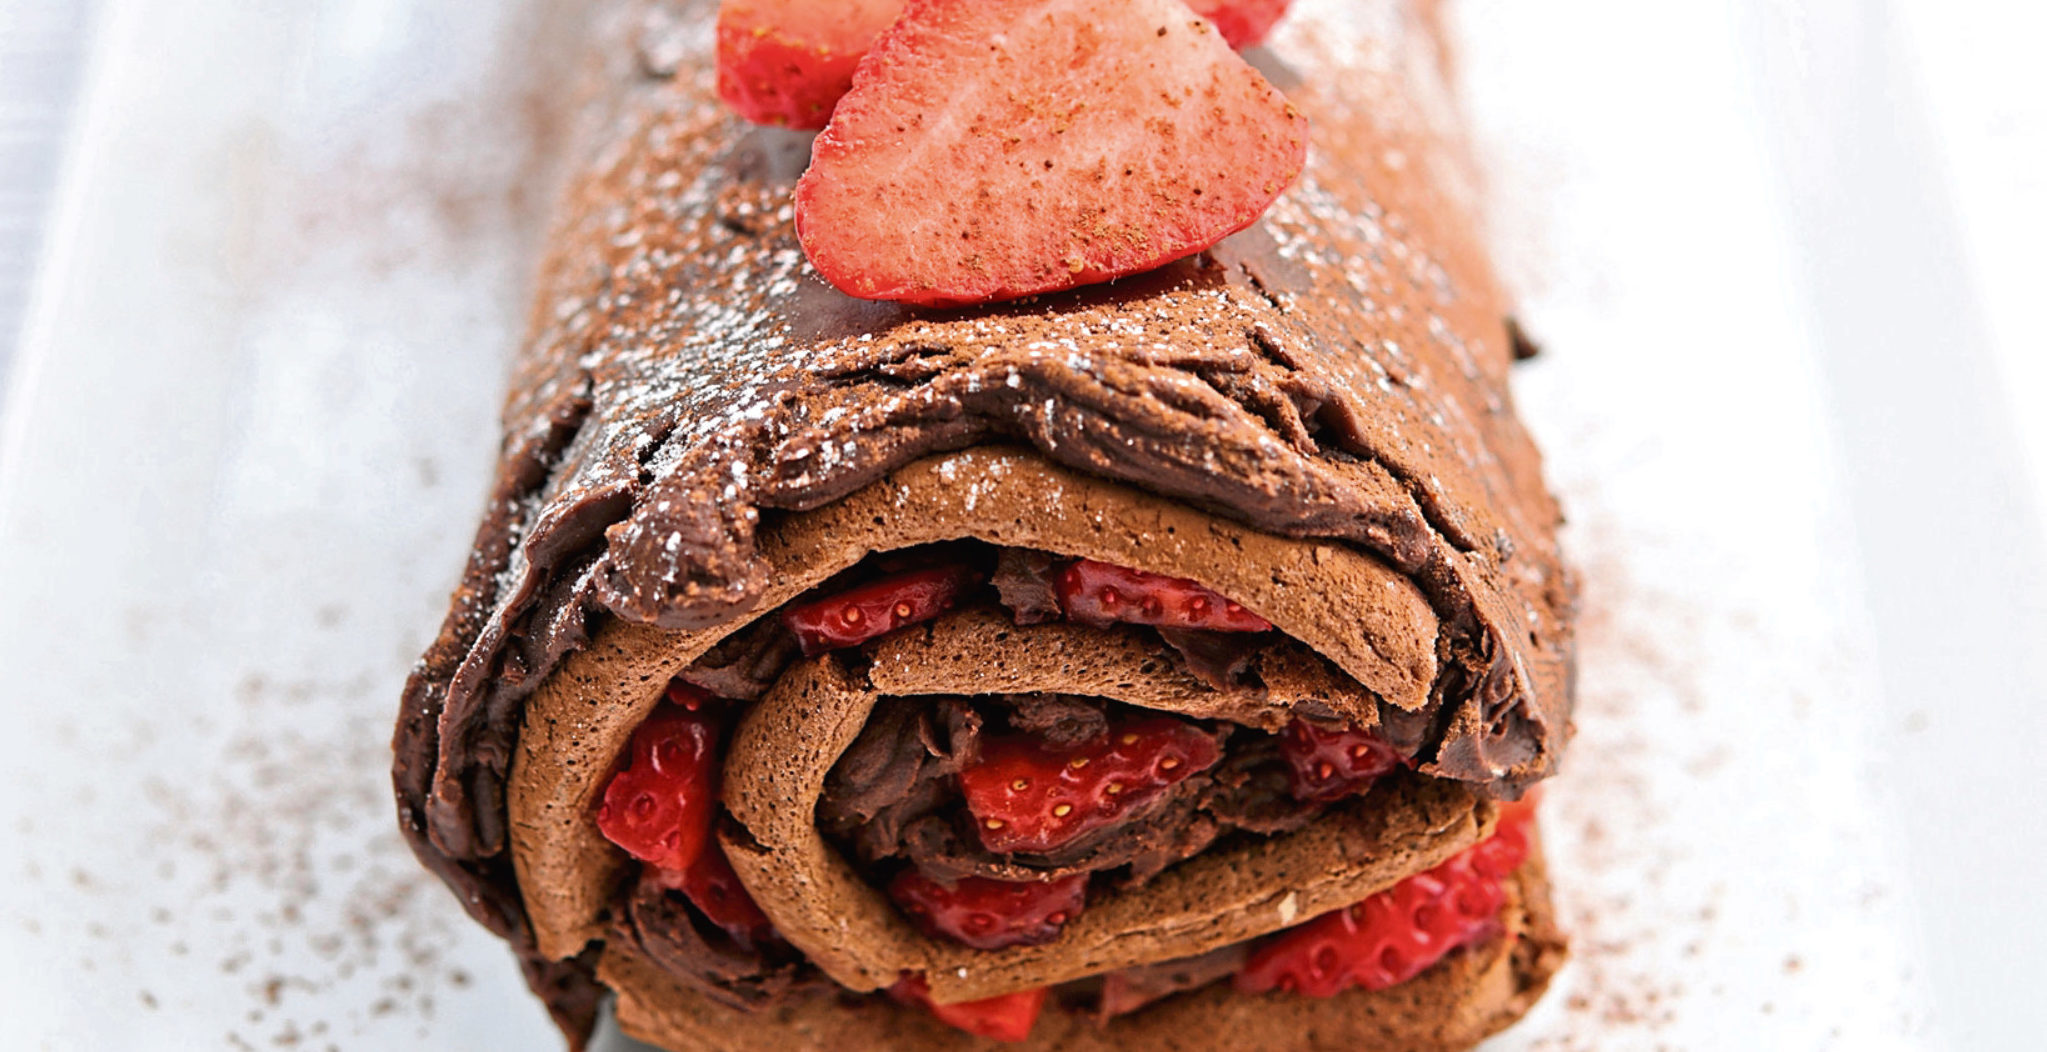 Strawberry and Chocolate Roulade